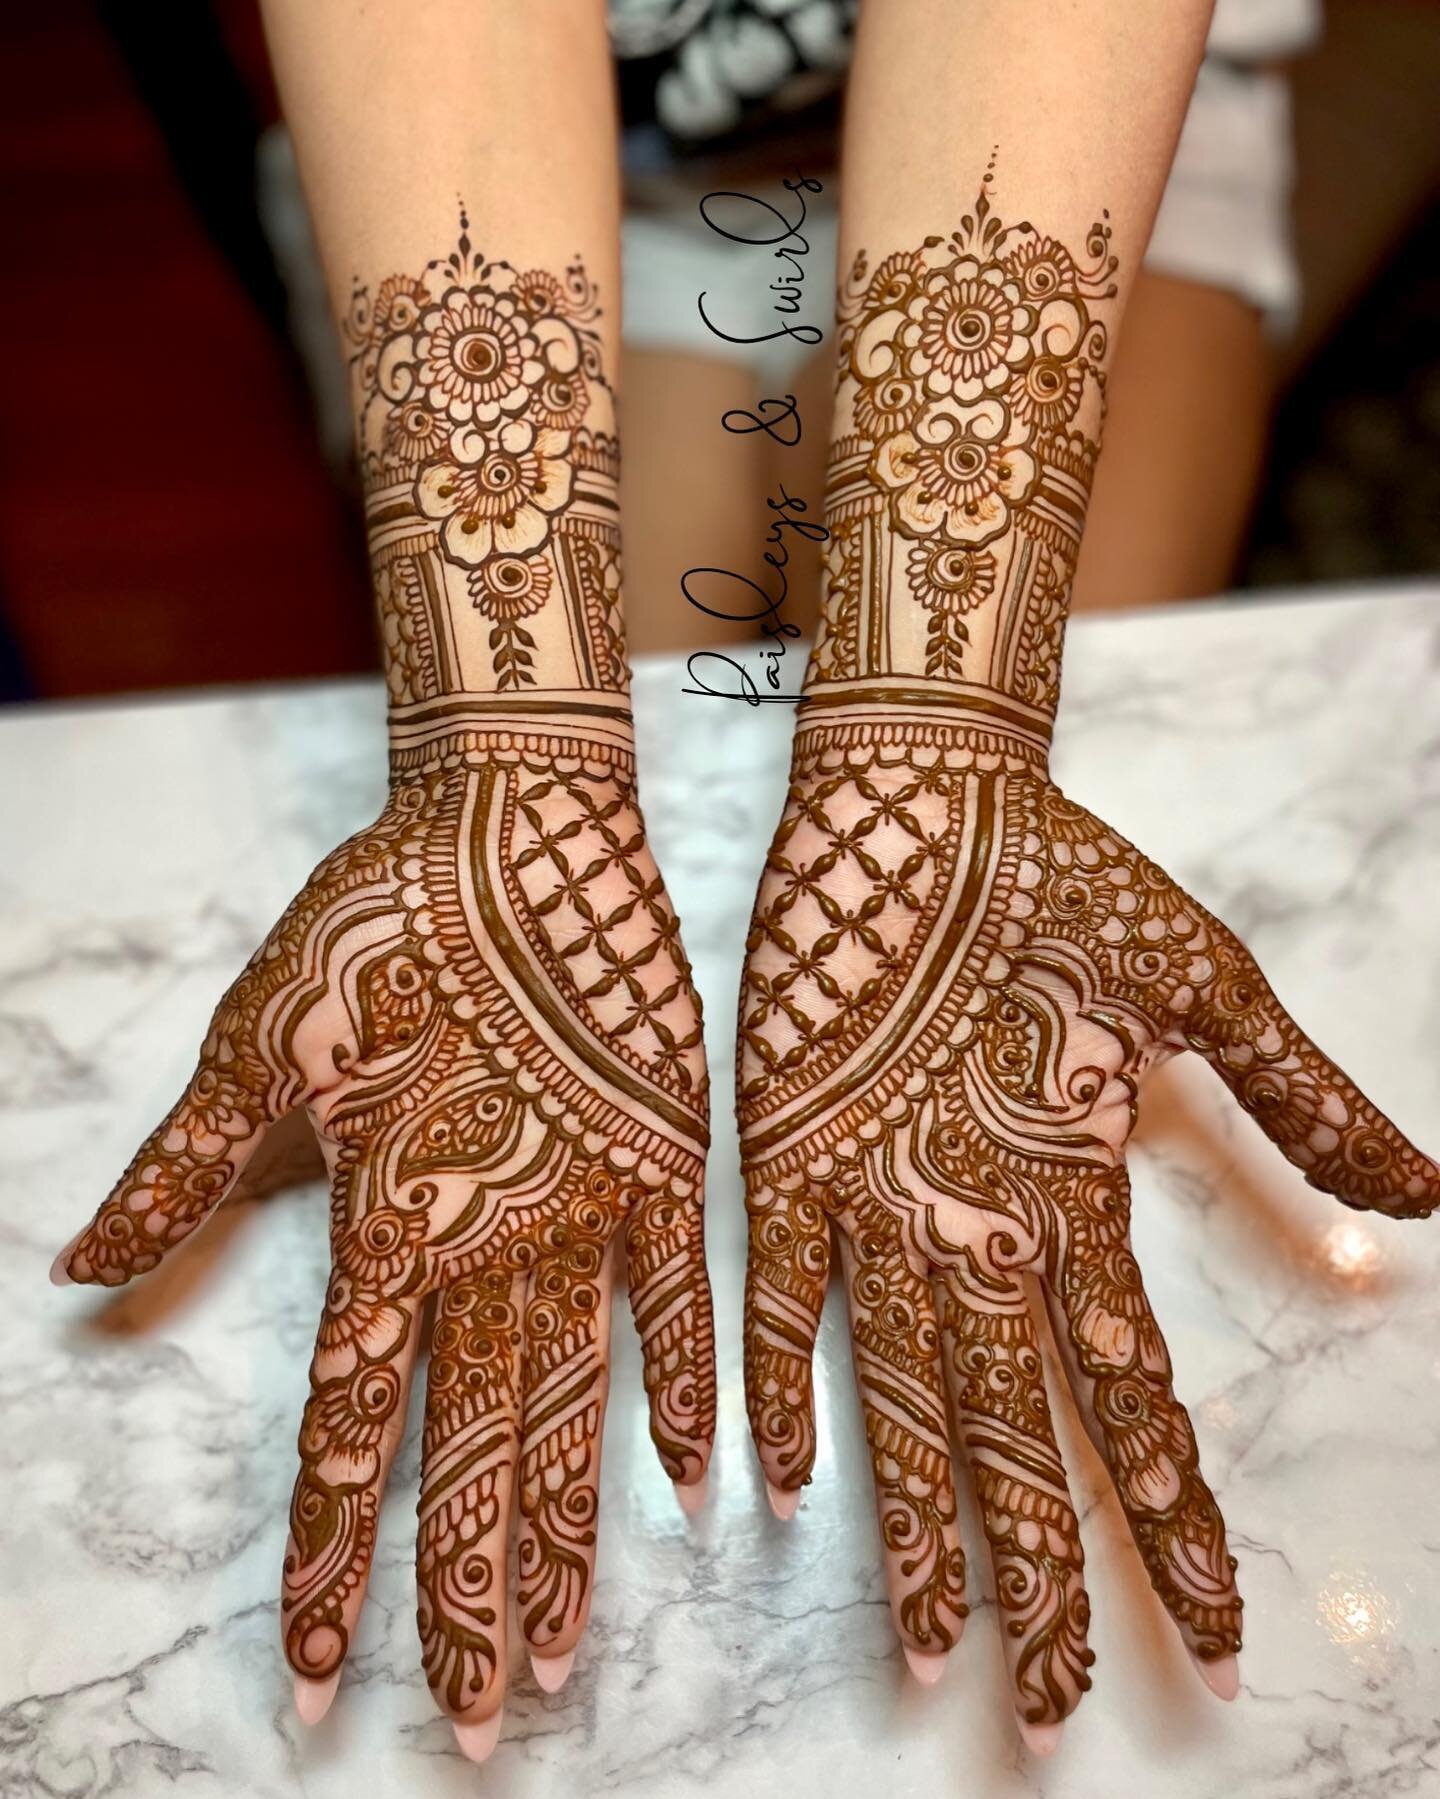 Bridal Henna for Princy ! She booked online on my website - the best way to do it :) such a seamless experience! 
.
.
.
.
#houstonhenna #hennahouston #houstonmehndi #houstonbridalhenna #houstonbridalmehndi #texashenna #professionalhennaartist